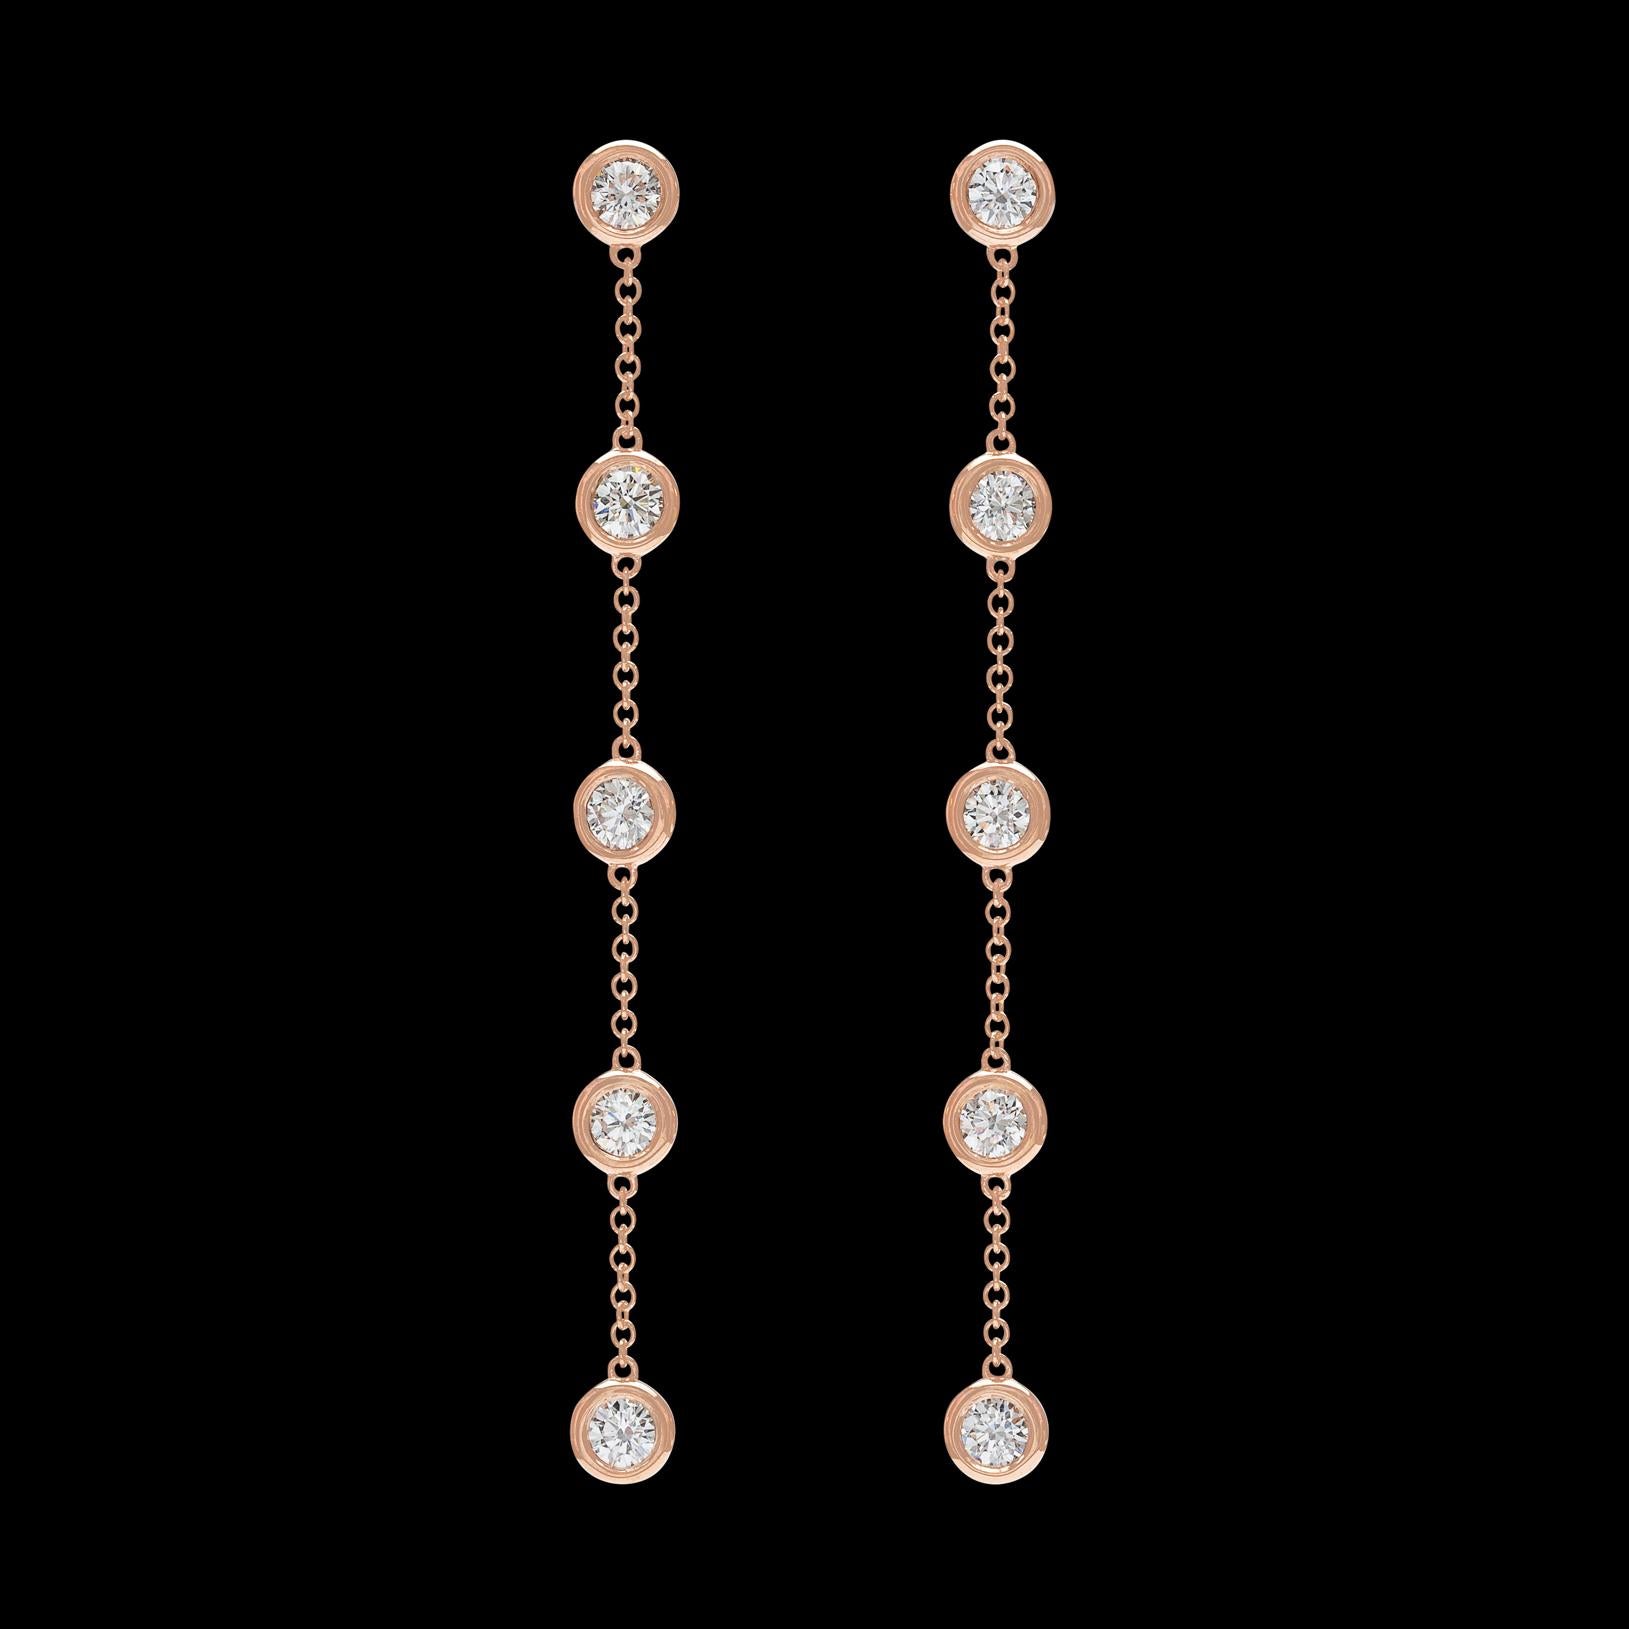 Diamond and Rose Gold Pendant Earrings In Excellent Condition For Sale In San Francisco, CA